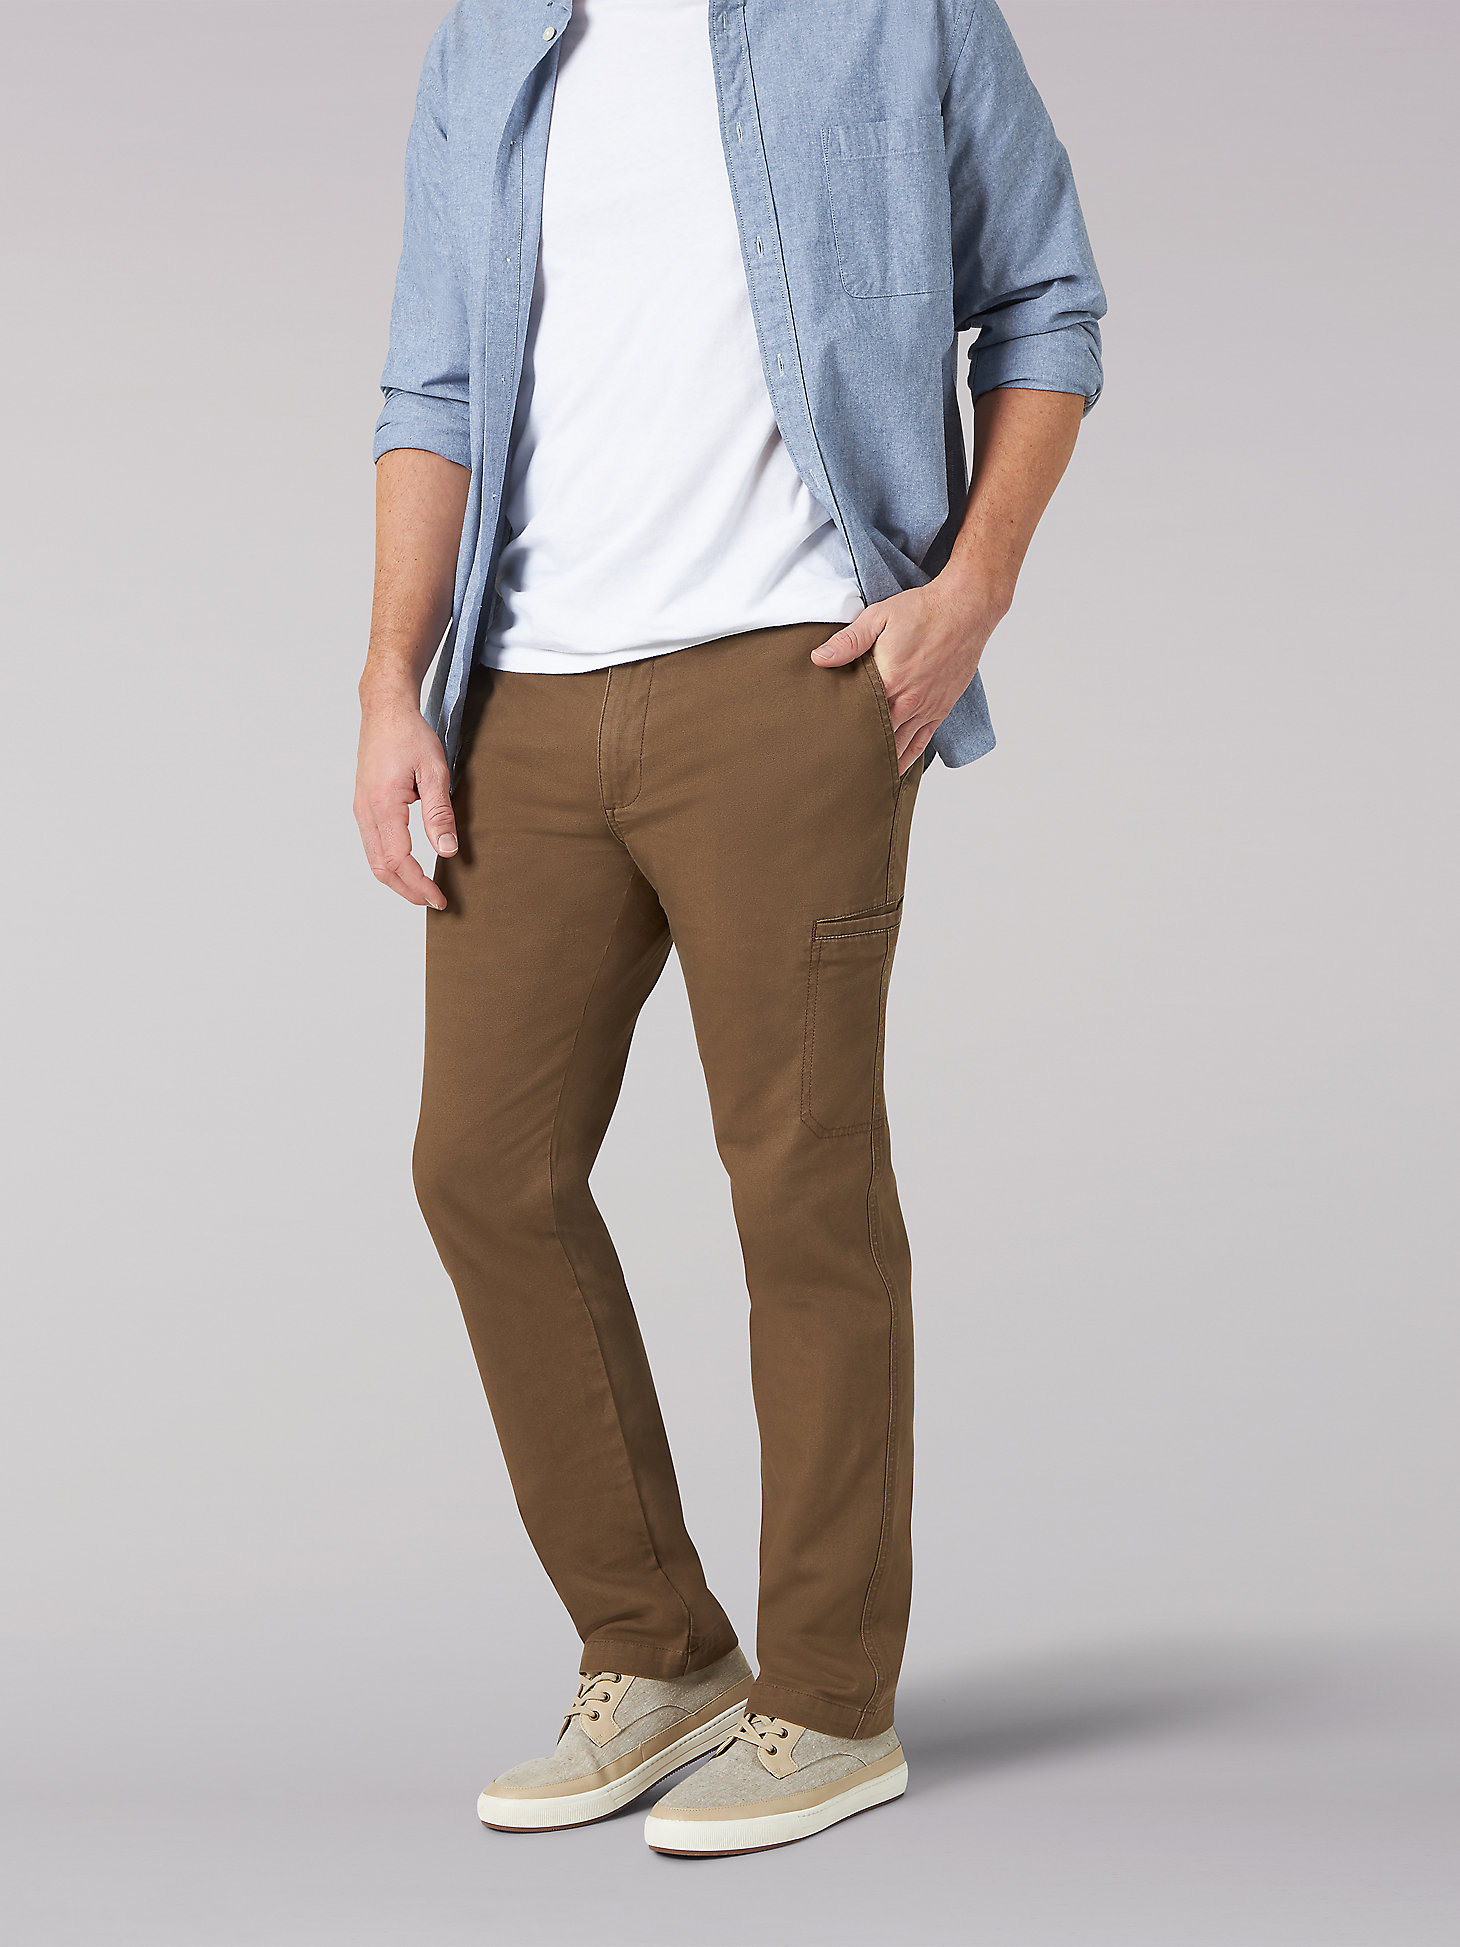 Men's Extreme Motion Relaxed Fit Cargo Pant in Teak main view